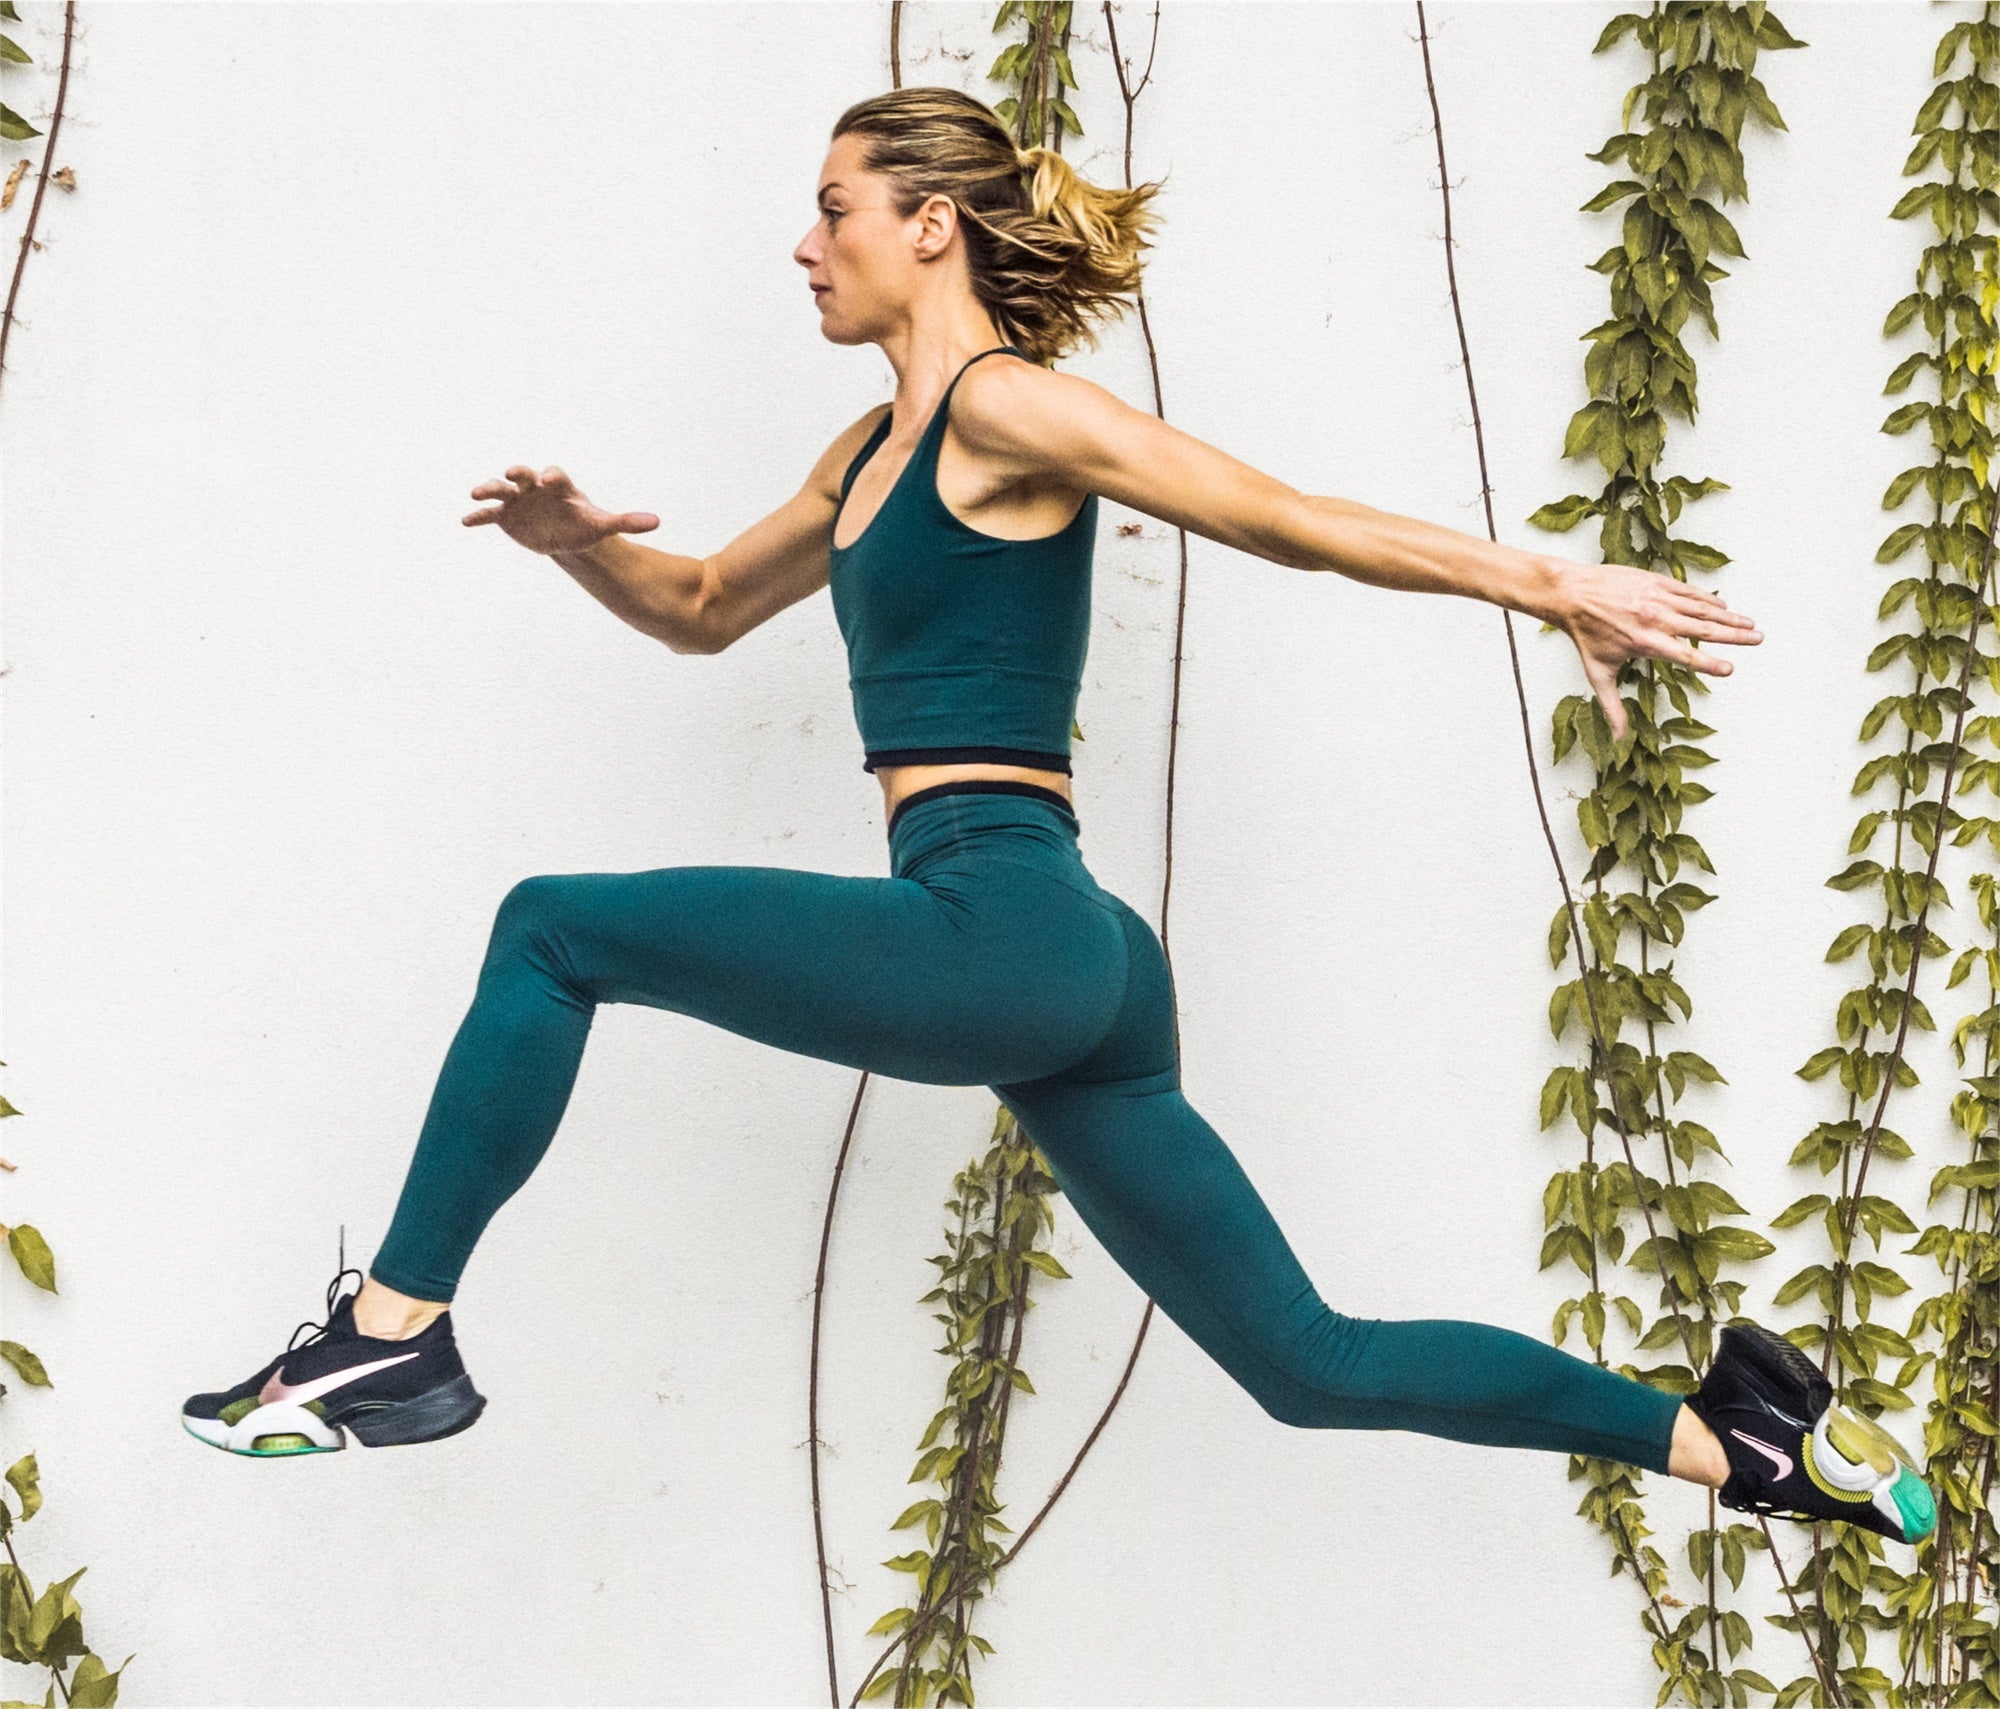 Women leaping through air in green leggings and bra top and sneakers. Background is white wall with green ivy.